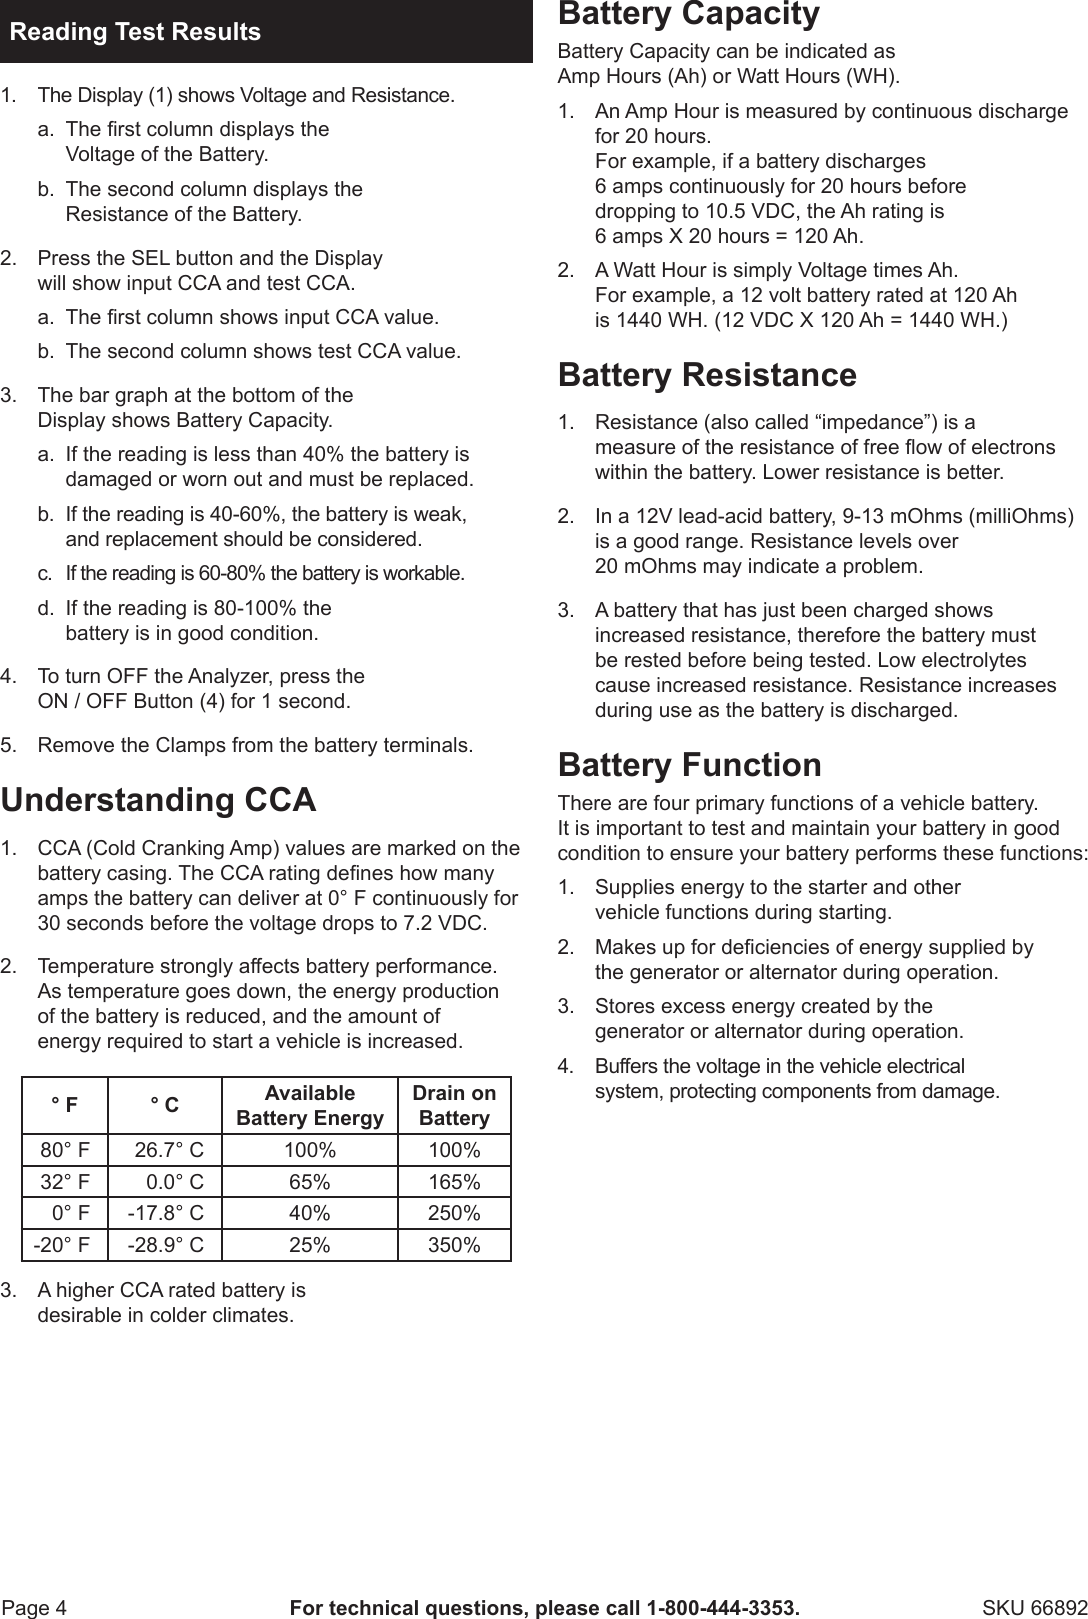 Page 4 of 8 - Harbor-Freight Harbor-Freight-Digital-Battery-Analyzer-Product-Manual-  Harbor-freight-digital-battery-analyzer-product-manual